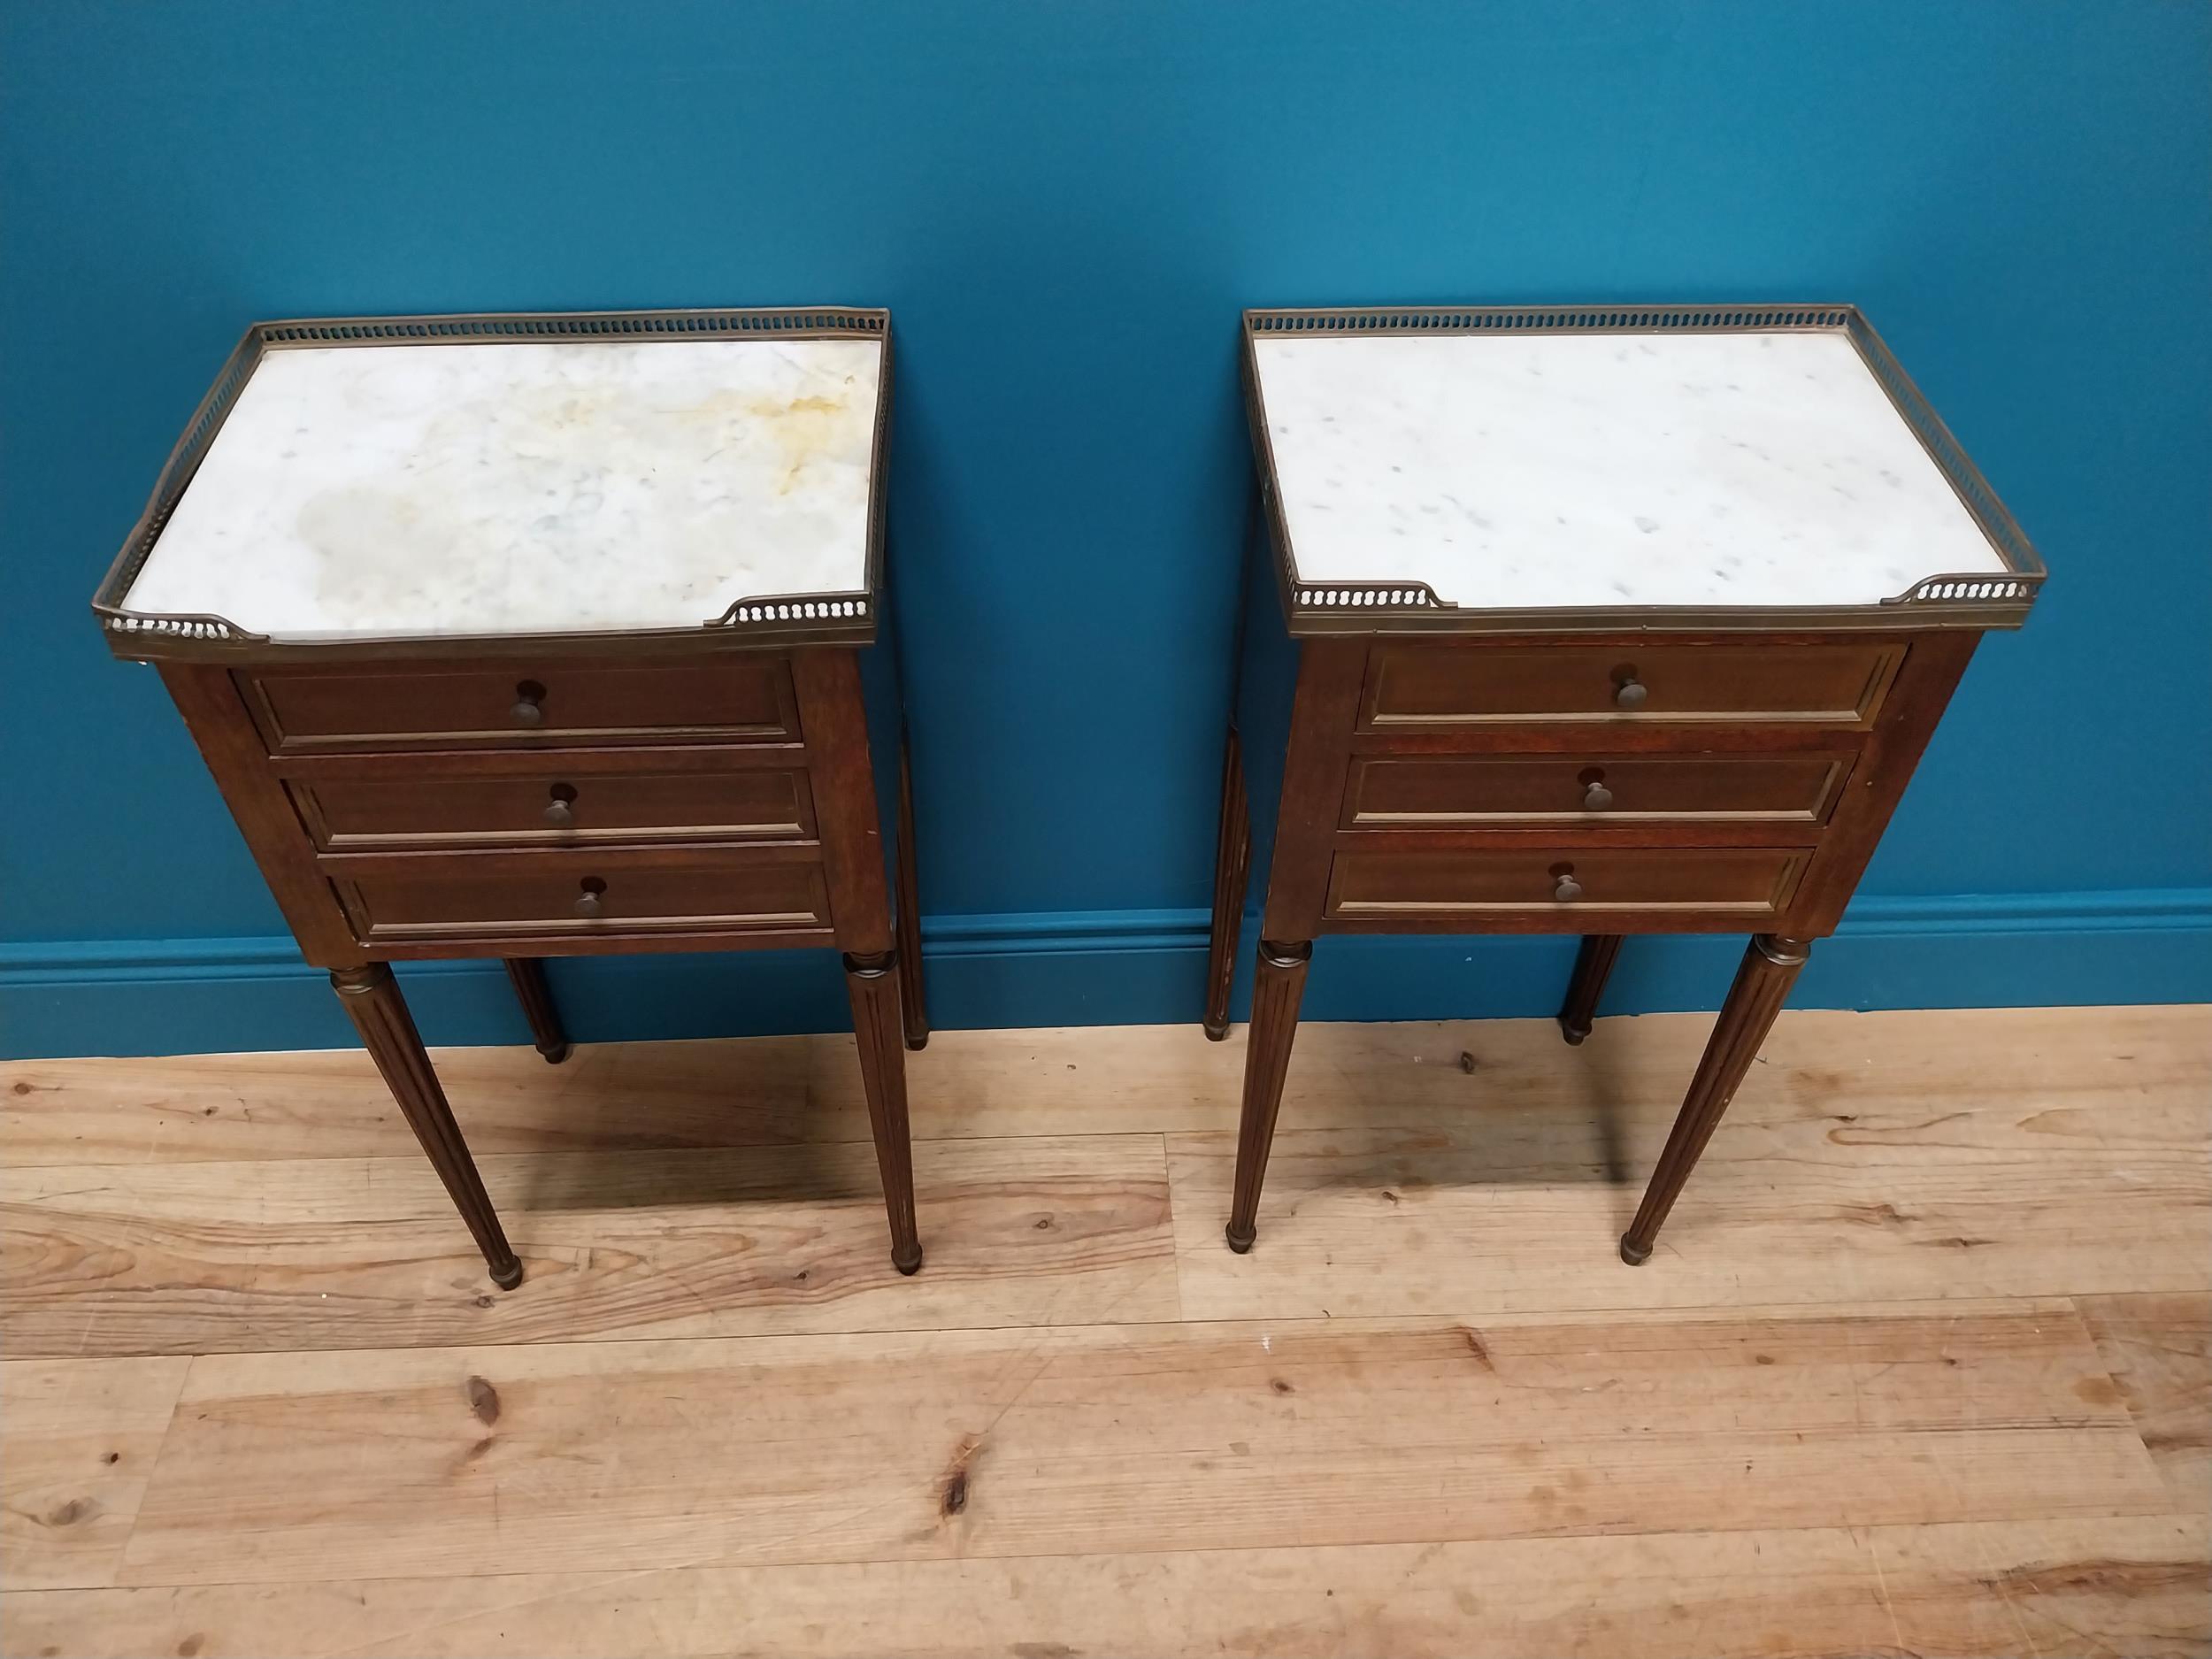 Pair of 19th C. mahogany and brass bedside lockers with inset marble top and three drawers raised on - Image 2 of 5